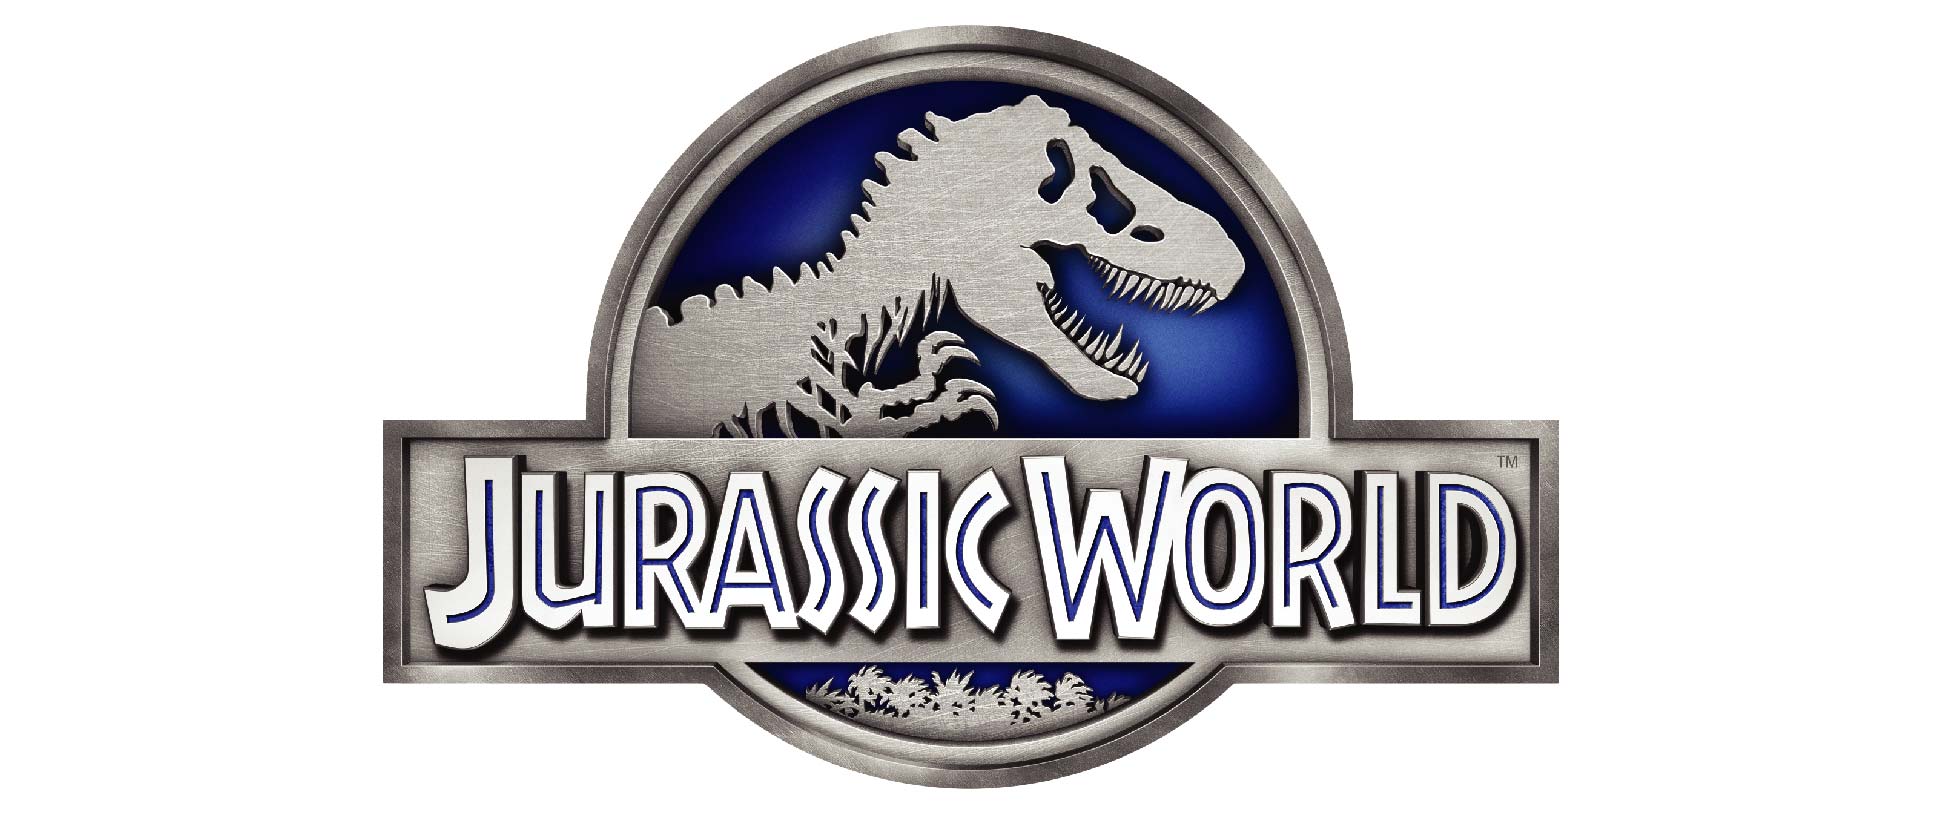 People with Blue World Logo - Jurassic World's Sponsorship Campaign Blog Post